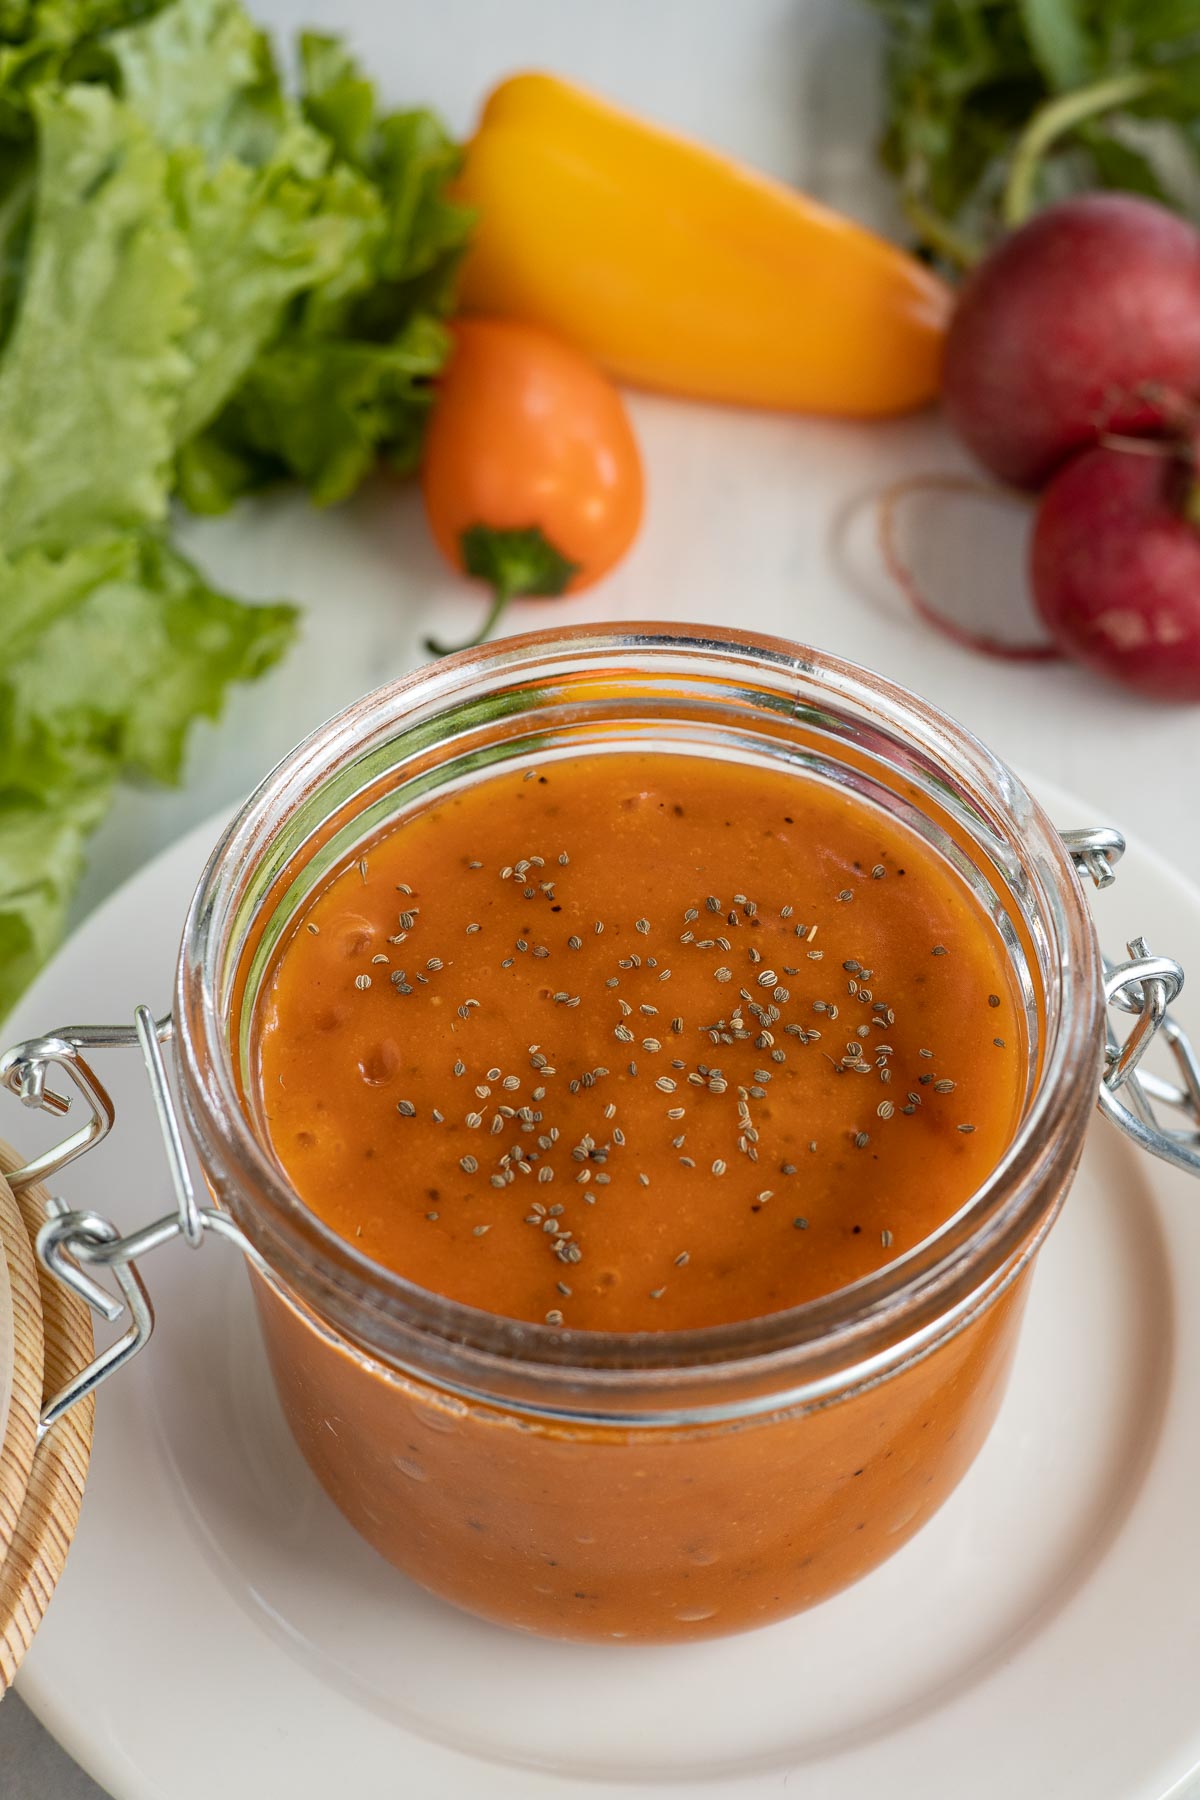 A jar of French dressing with green salad ingredients.